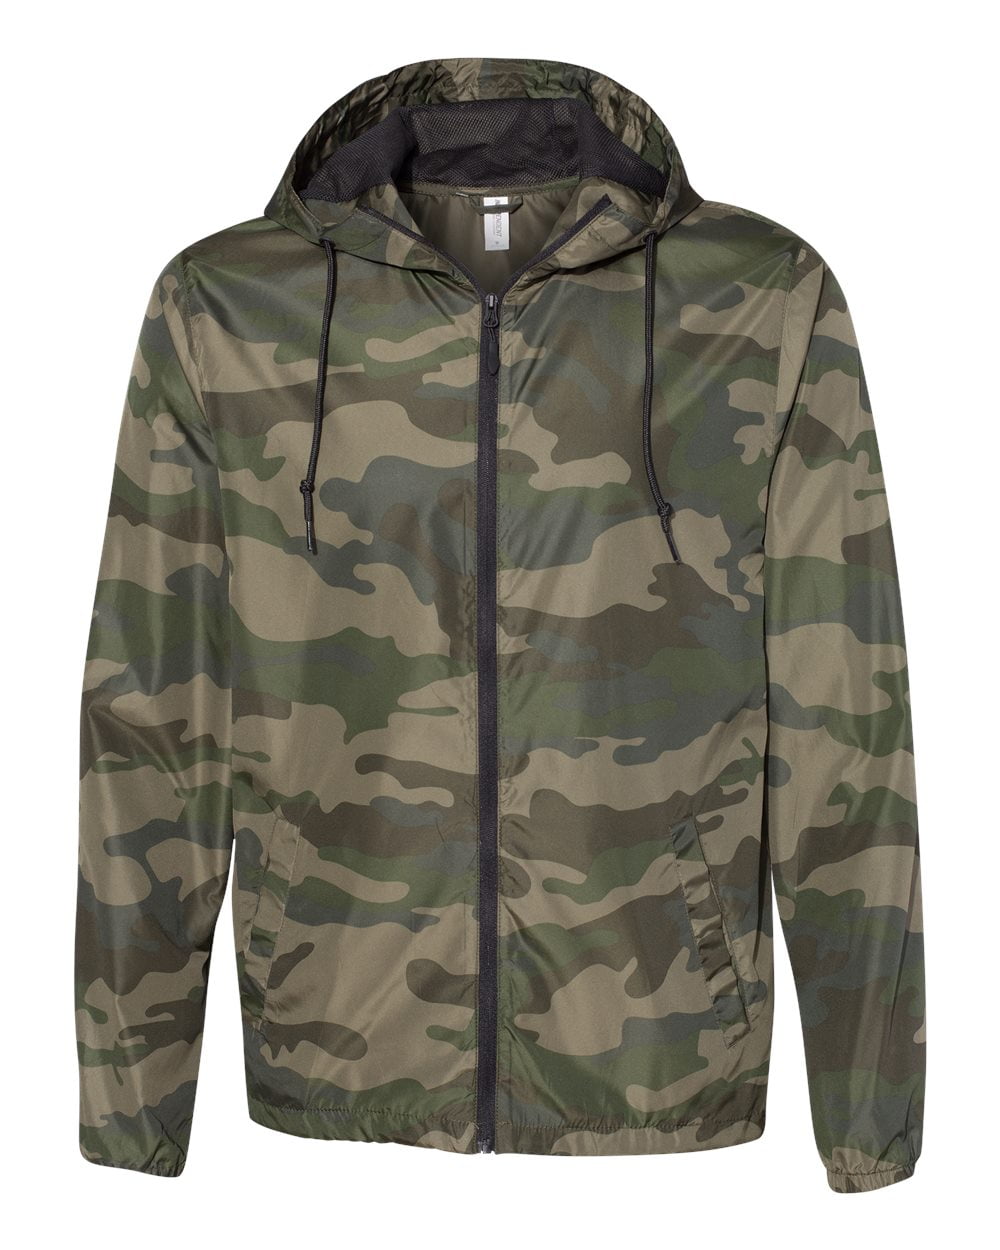 Independent Trading Company Lightweight Windbreaker Jacket, Forest Camo / Xs